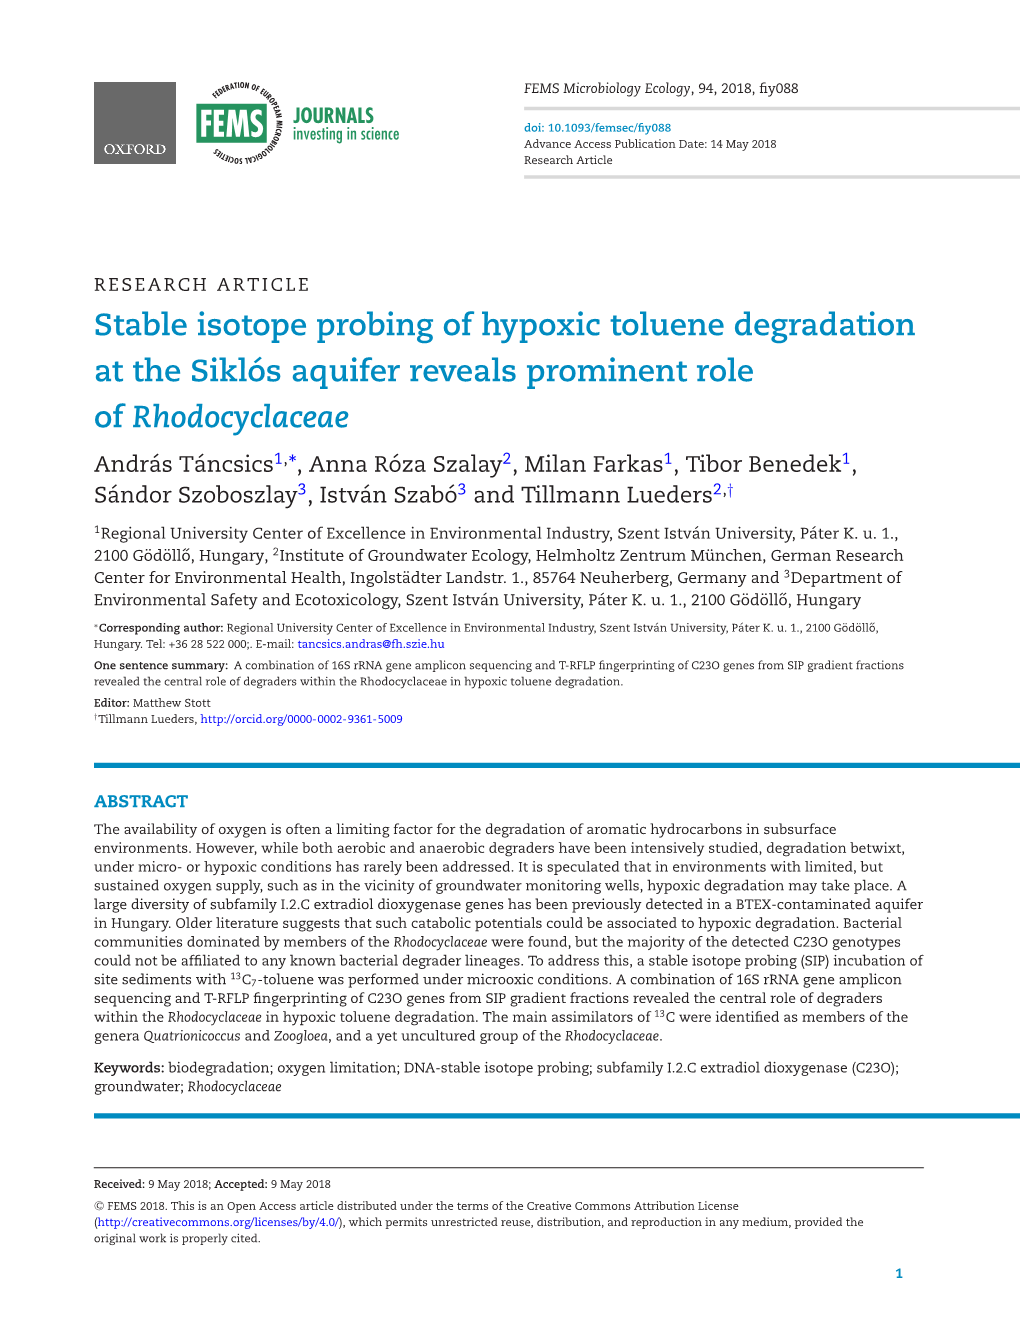 Stable Isotope Probing of Hypoxic Toluene Degradation at the Sikl ´Os